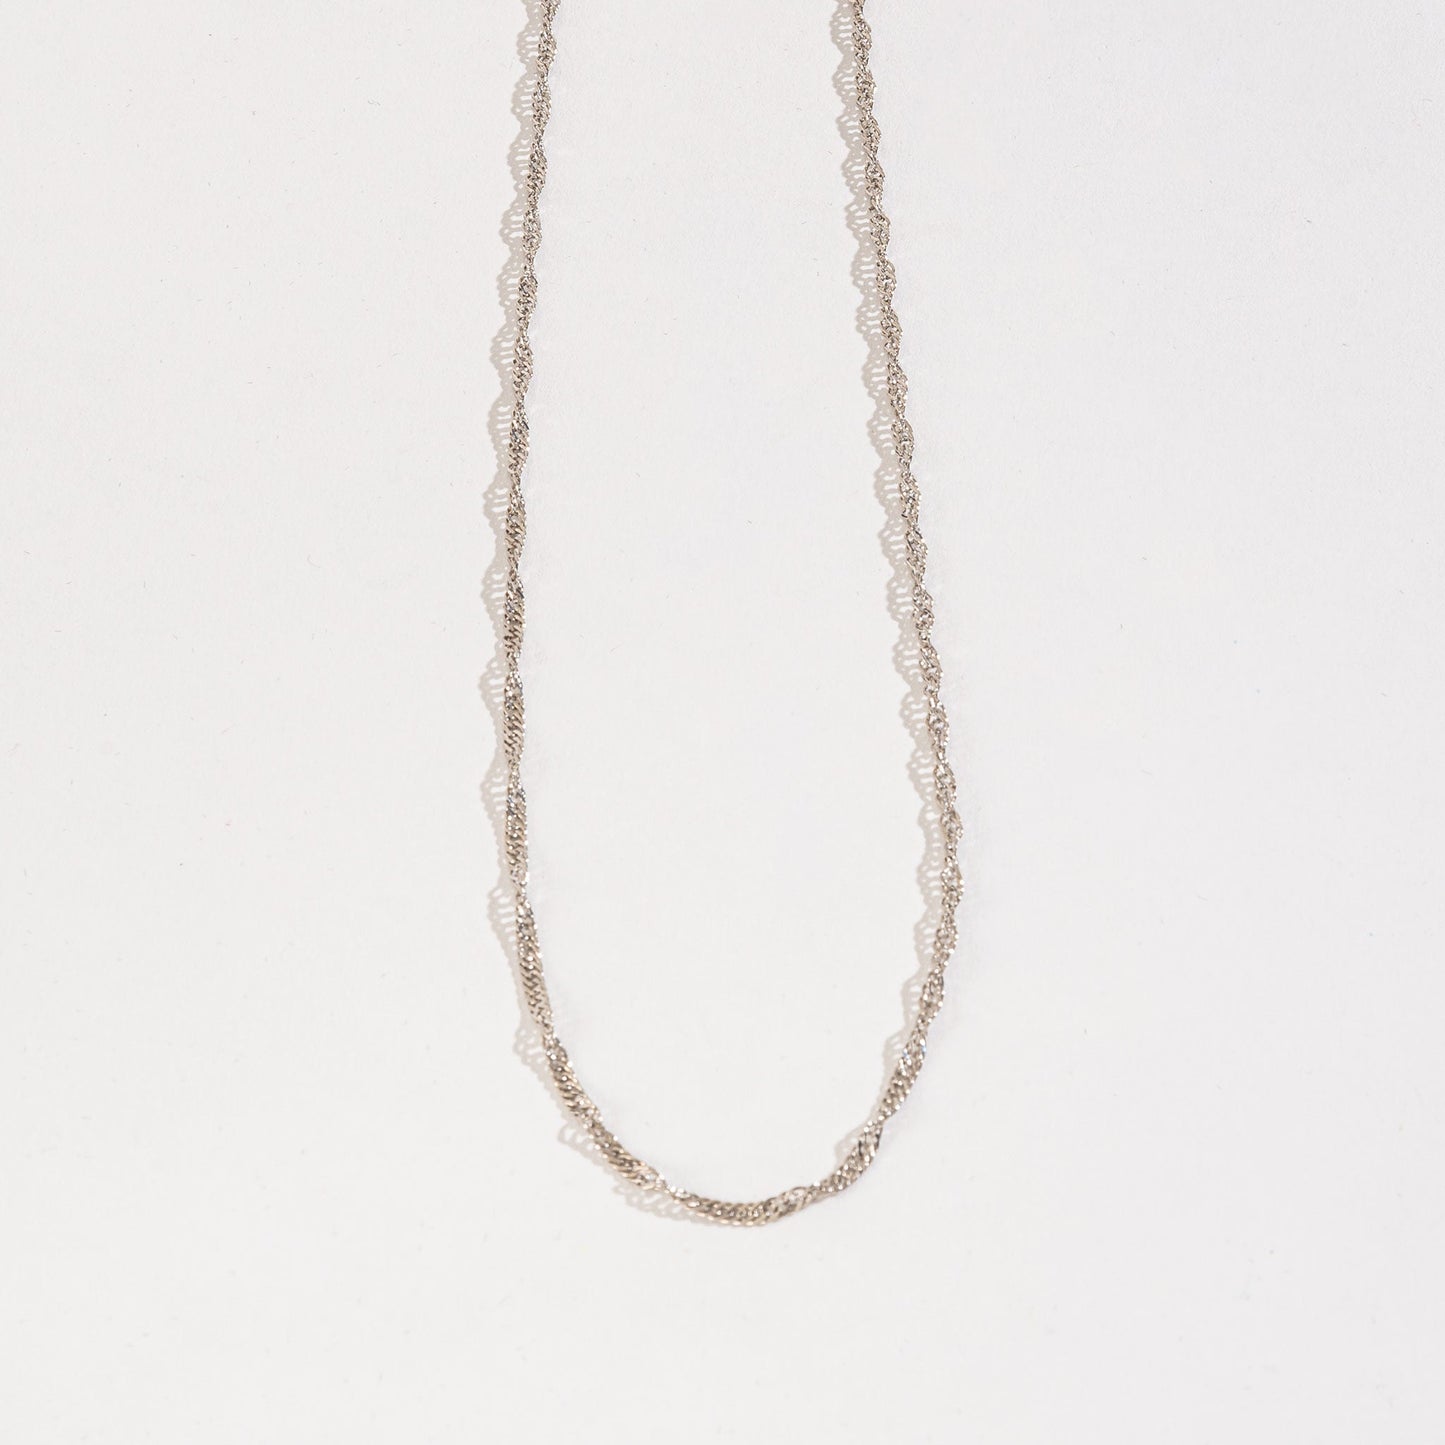 Layer Me 3Mm Twisted Chain Necklace